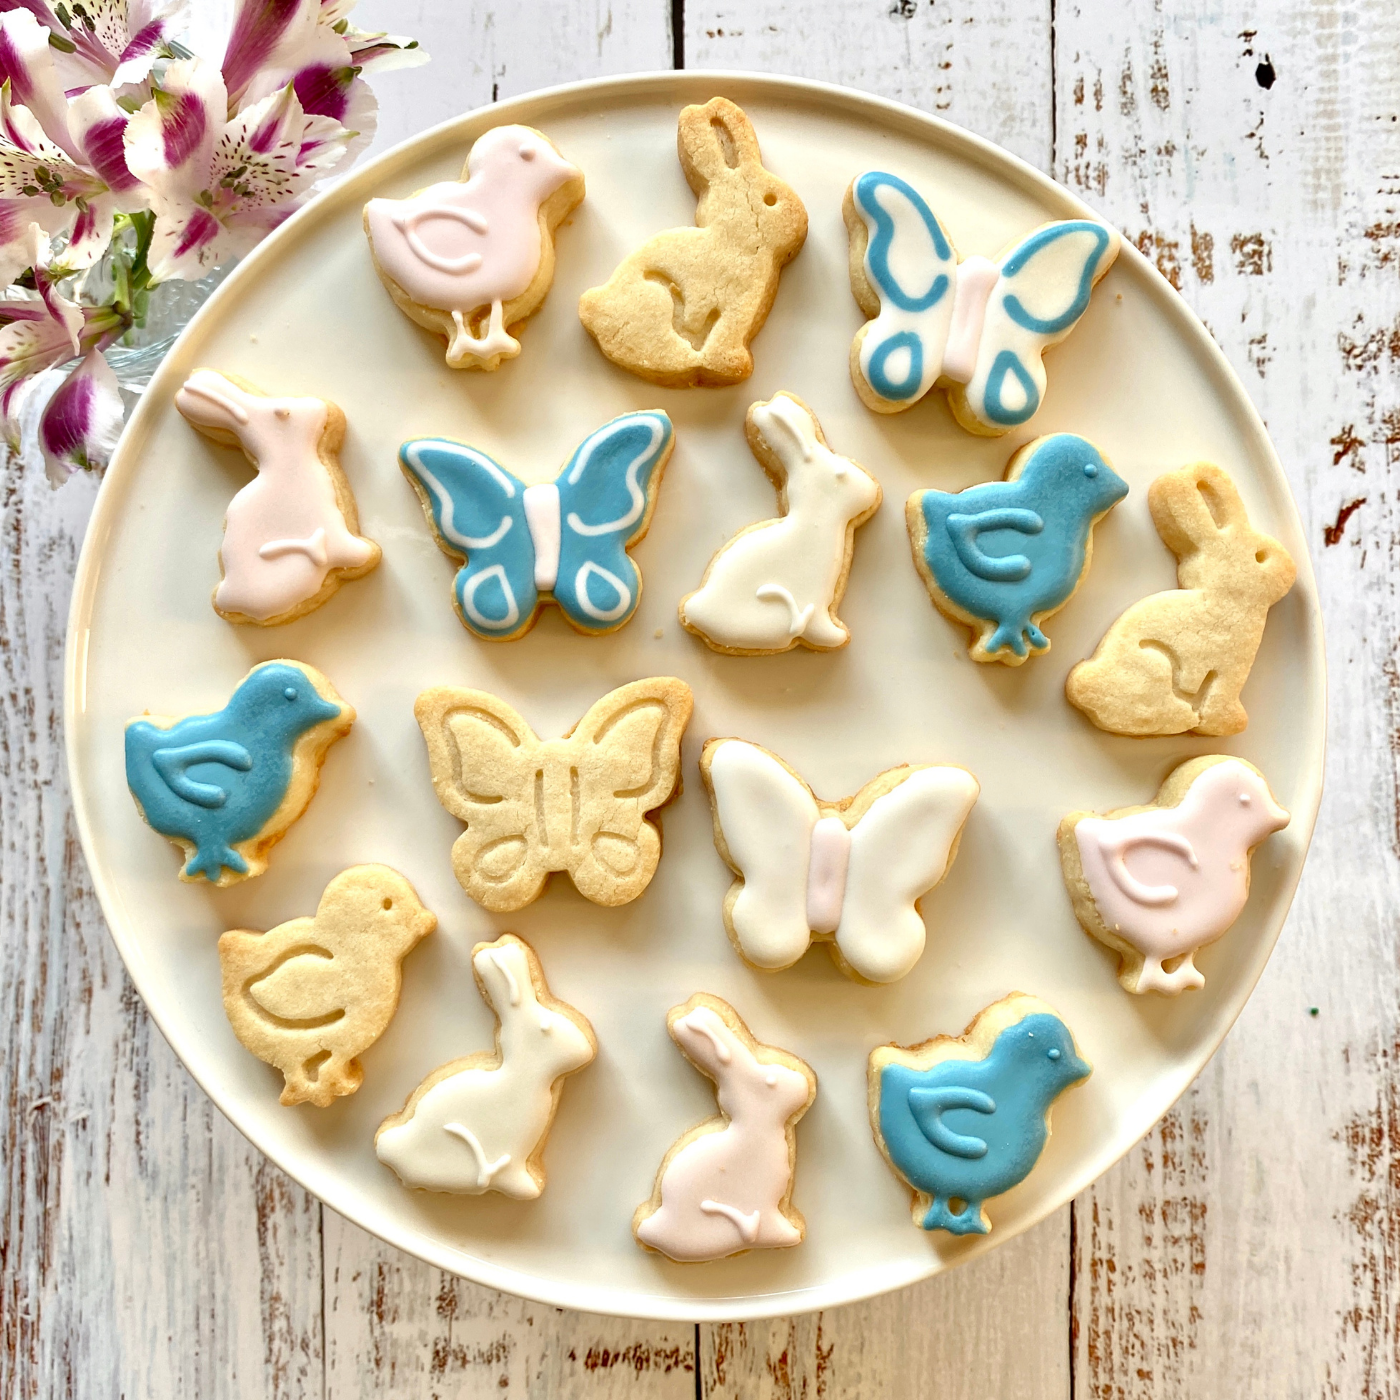 Lifestyle image of spring themed cookies